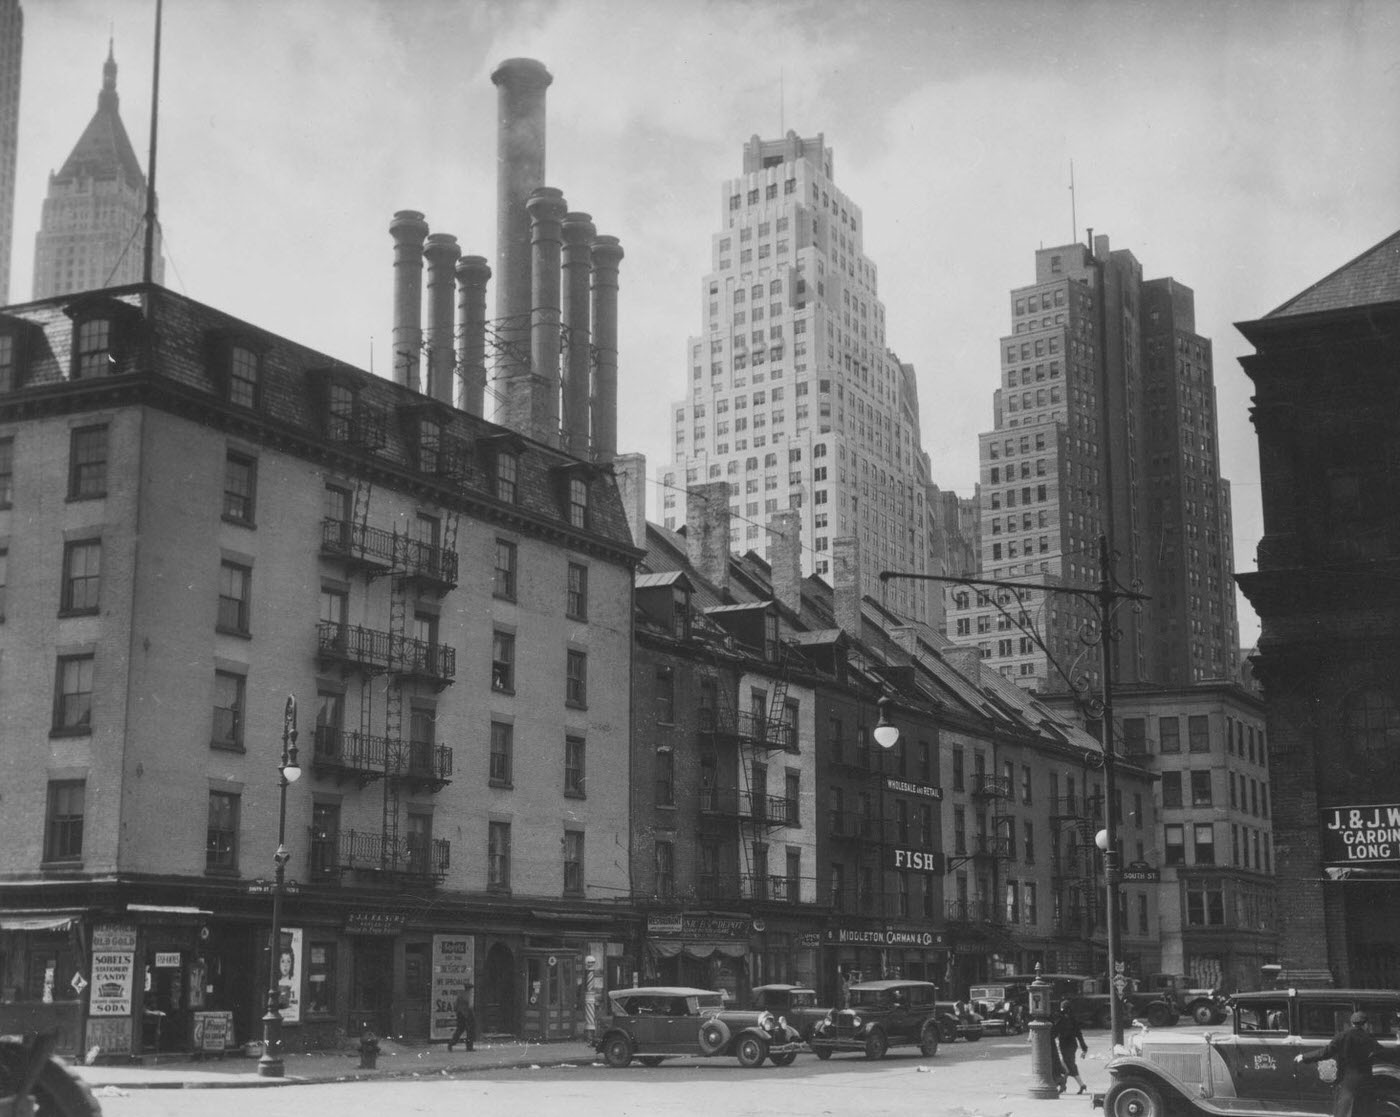 South Street From Fulton Fish Market Looking Southwest, Manhattan, 1929